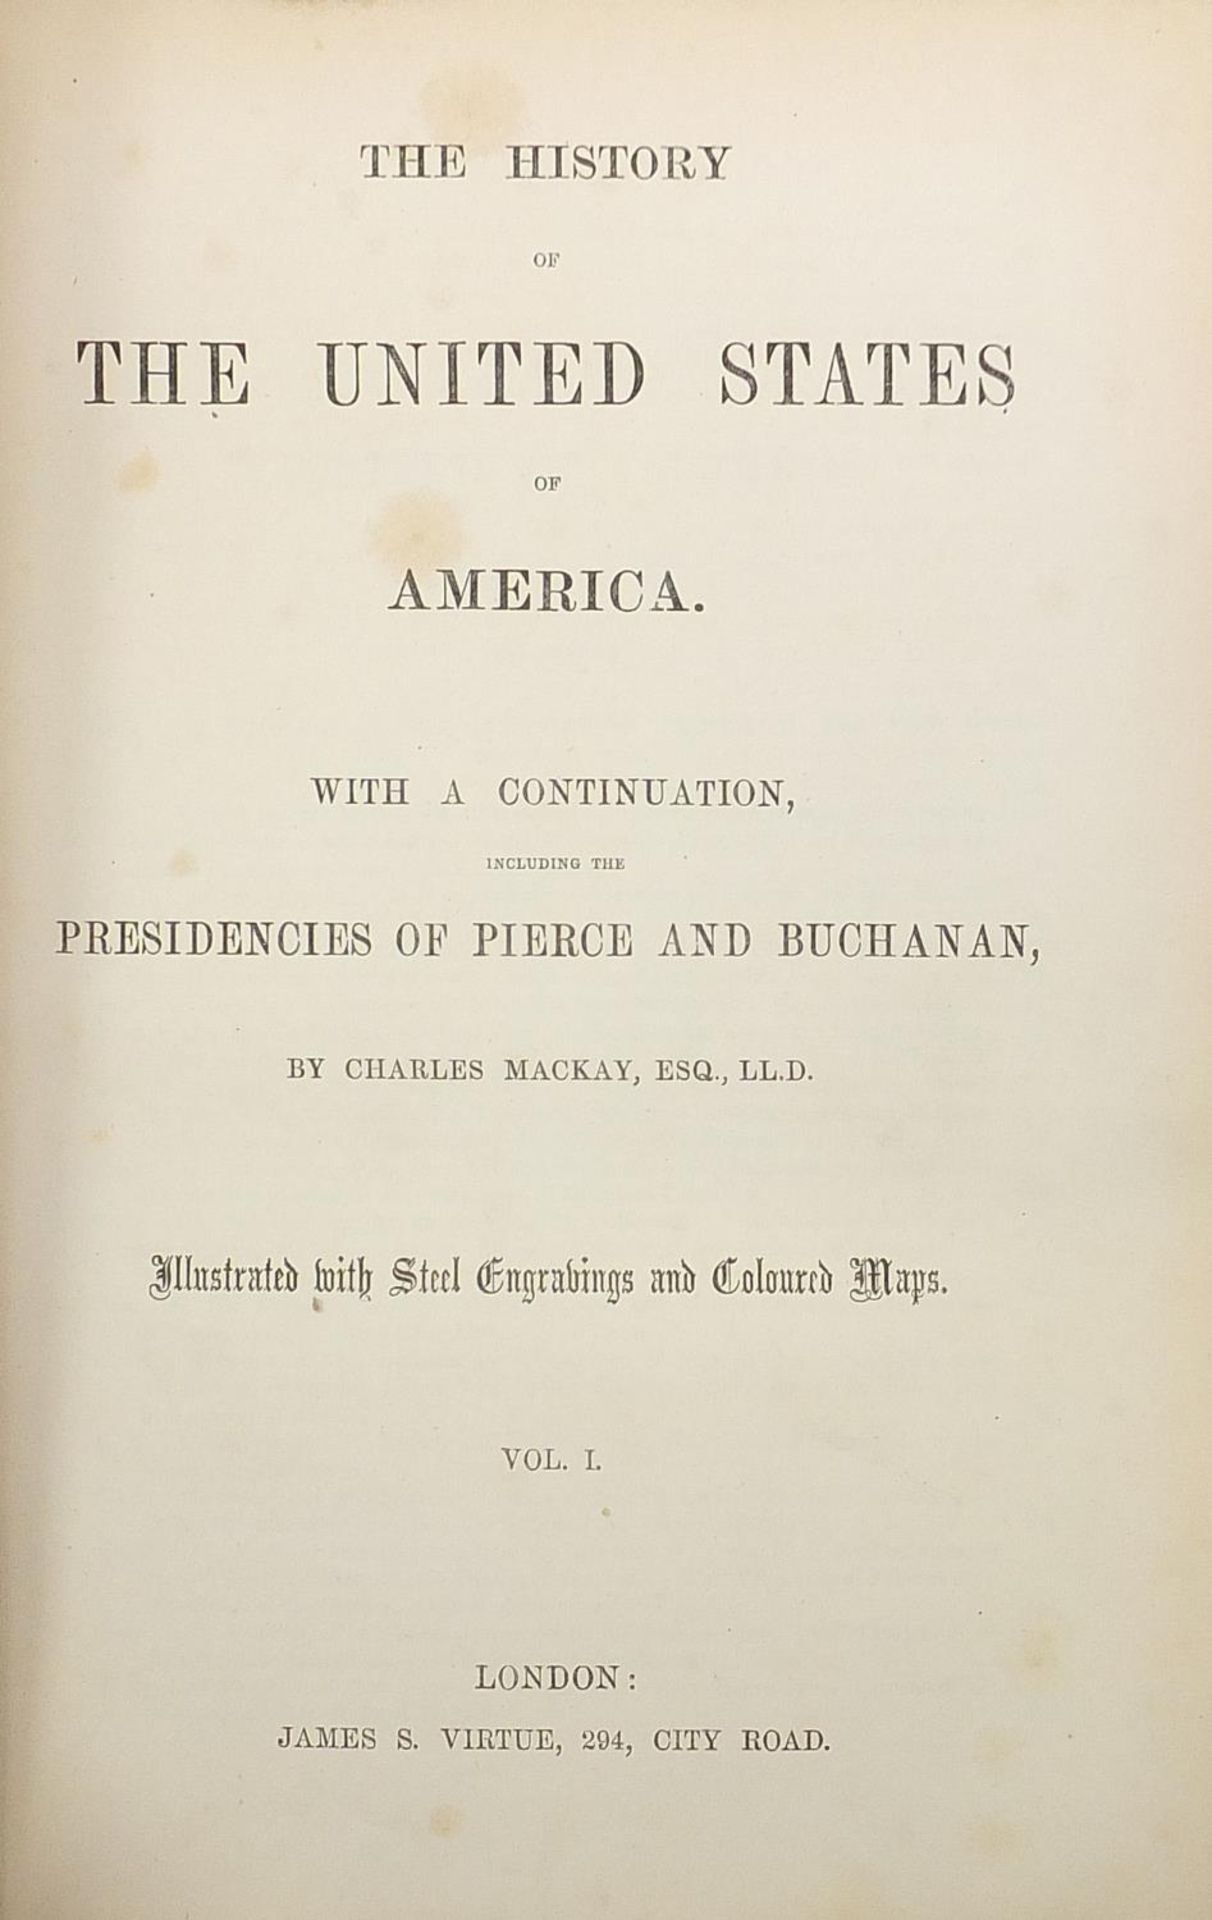 The History of the United States of America by Charles Mackay, two 19th century hardback books, - Image 6 of 7